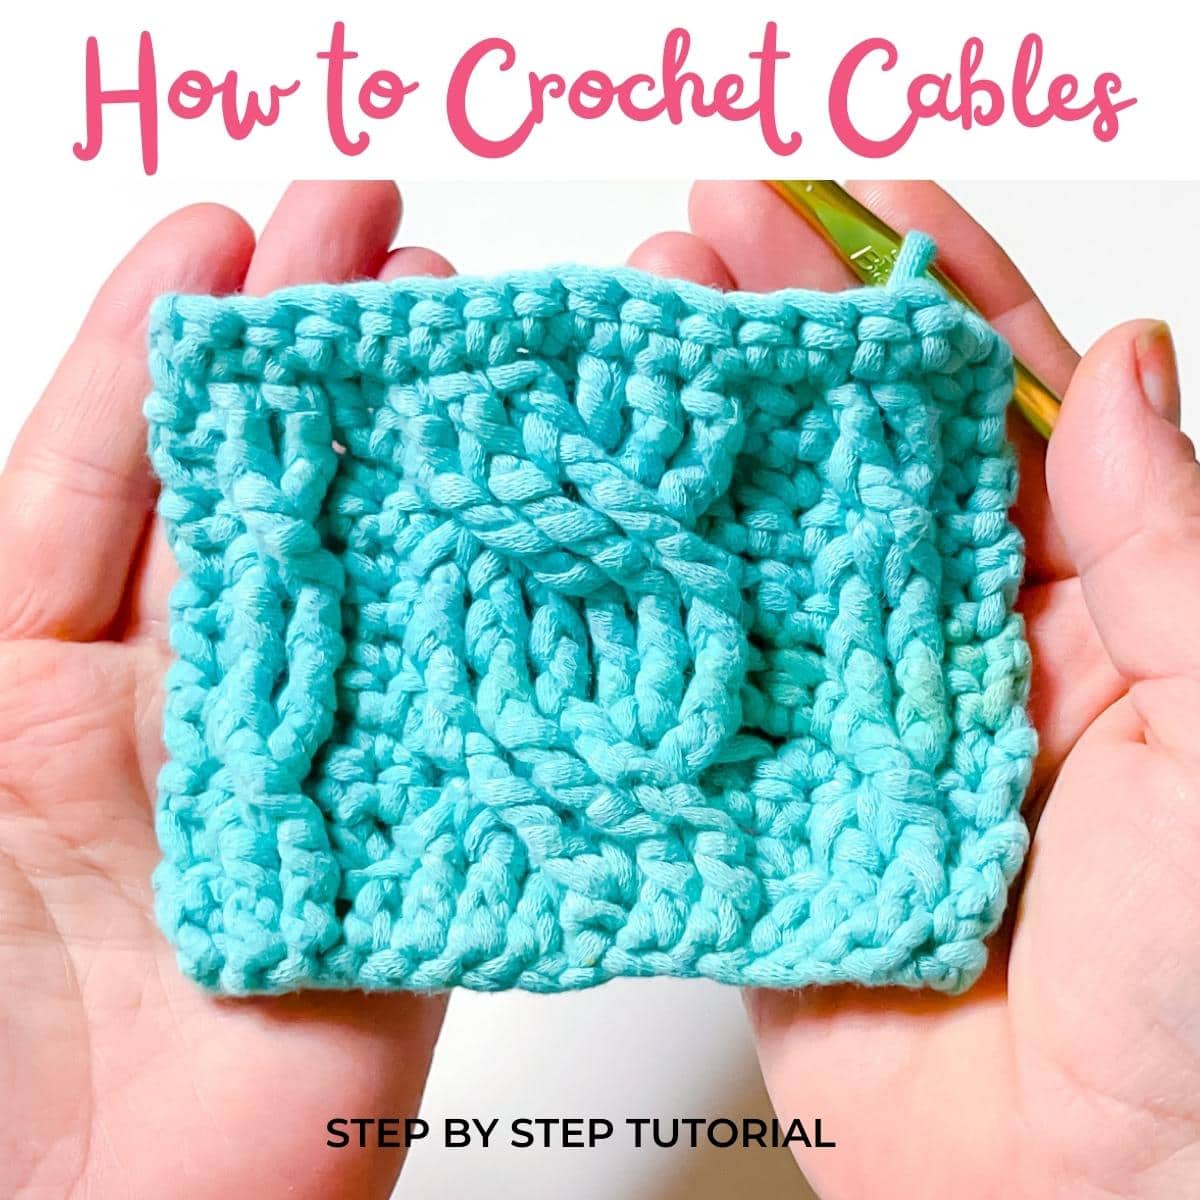 How to Crochet Cable Stitches Step by Step